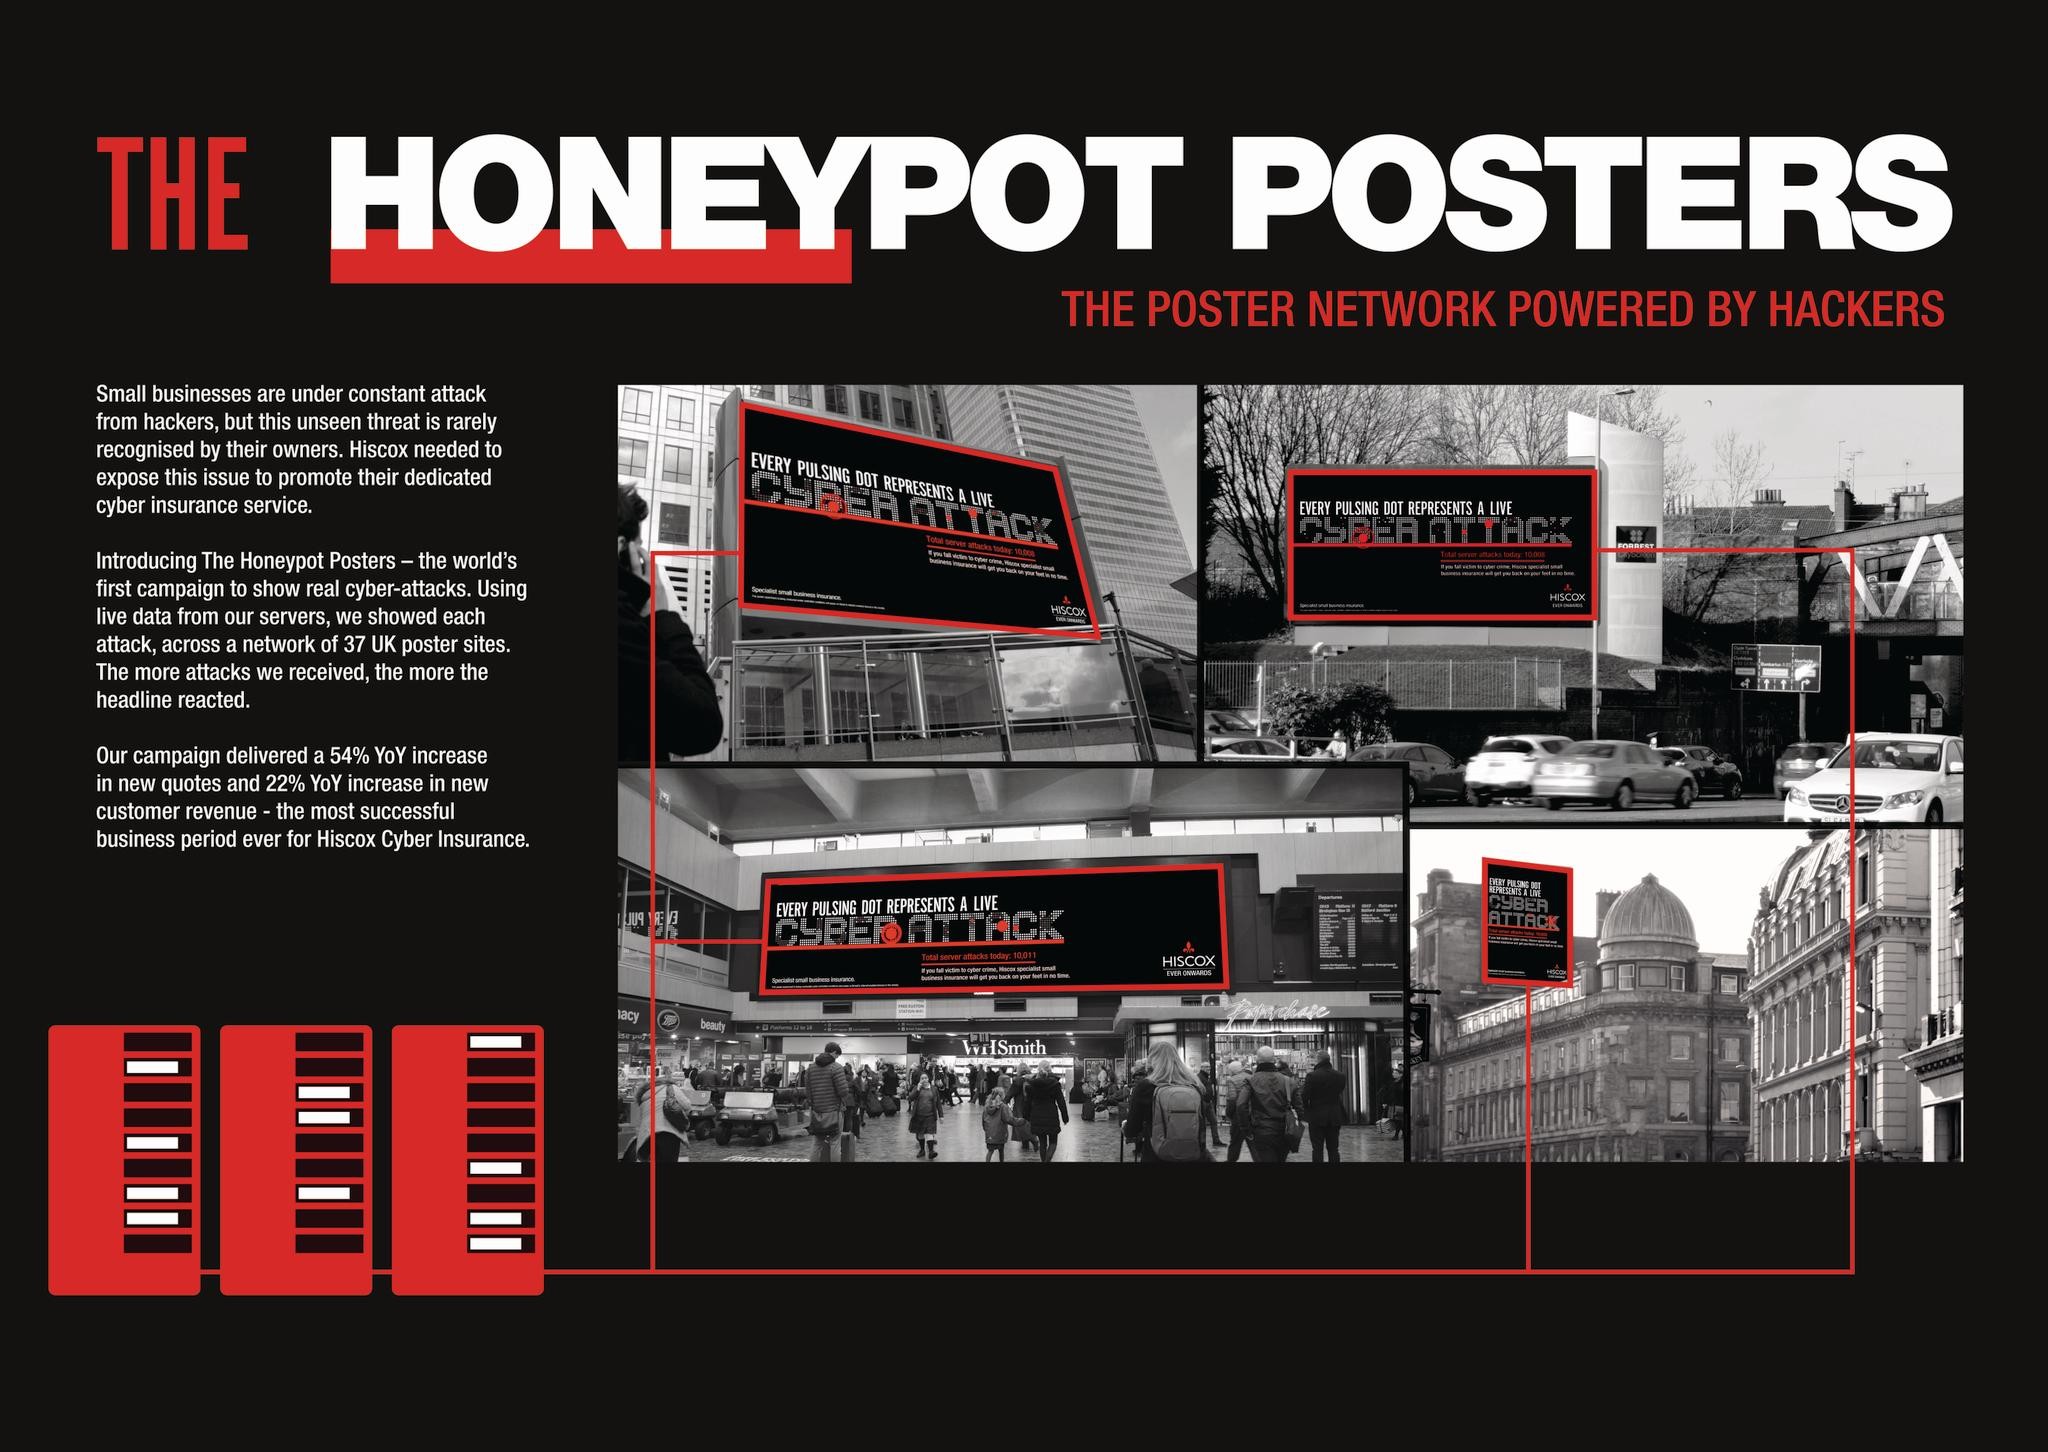 The Honeypot Posters